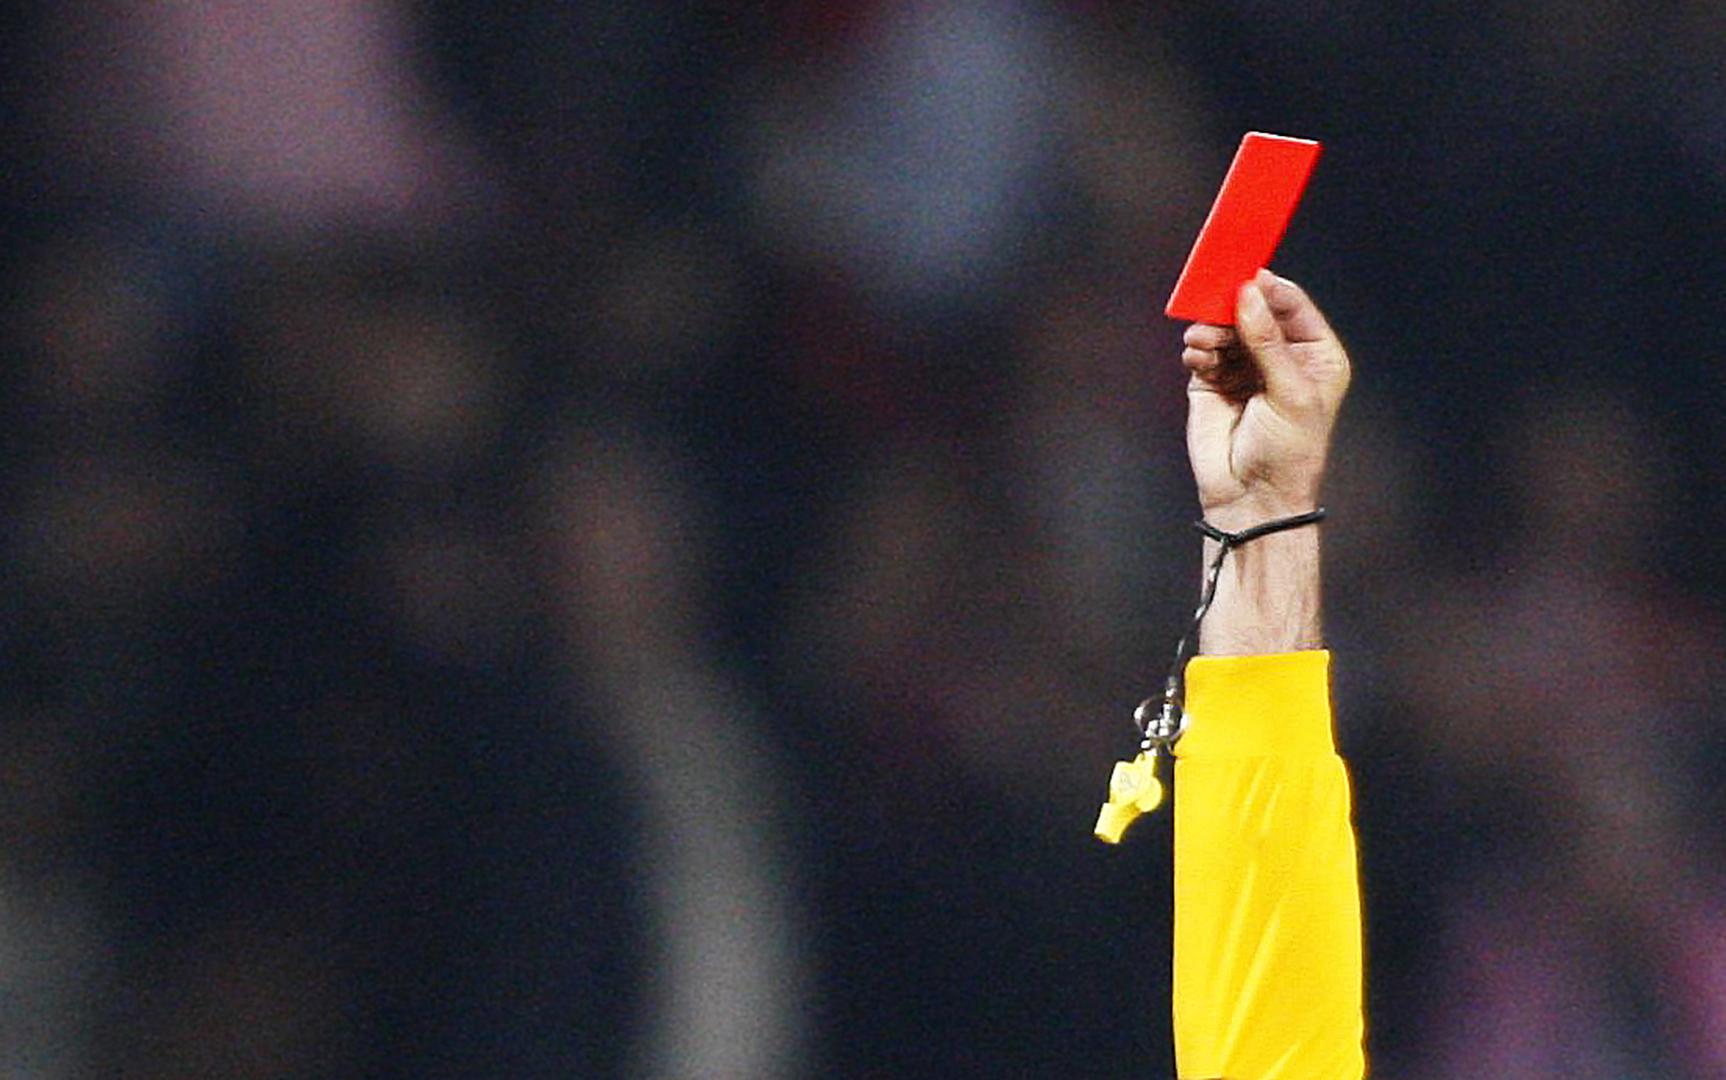 A red card raised at a soccer match, symbolizing Red Card Kenya, an organization comprised of four Kenyan civil society groups, which named 20 candidates unfit to run for elections in a recent report